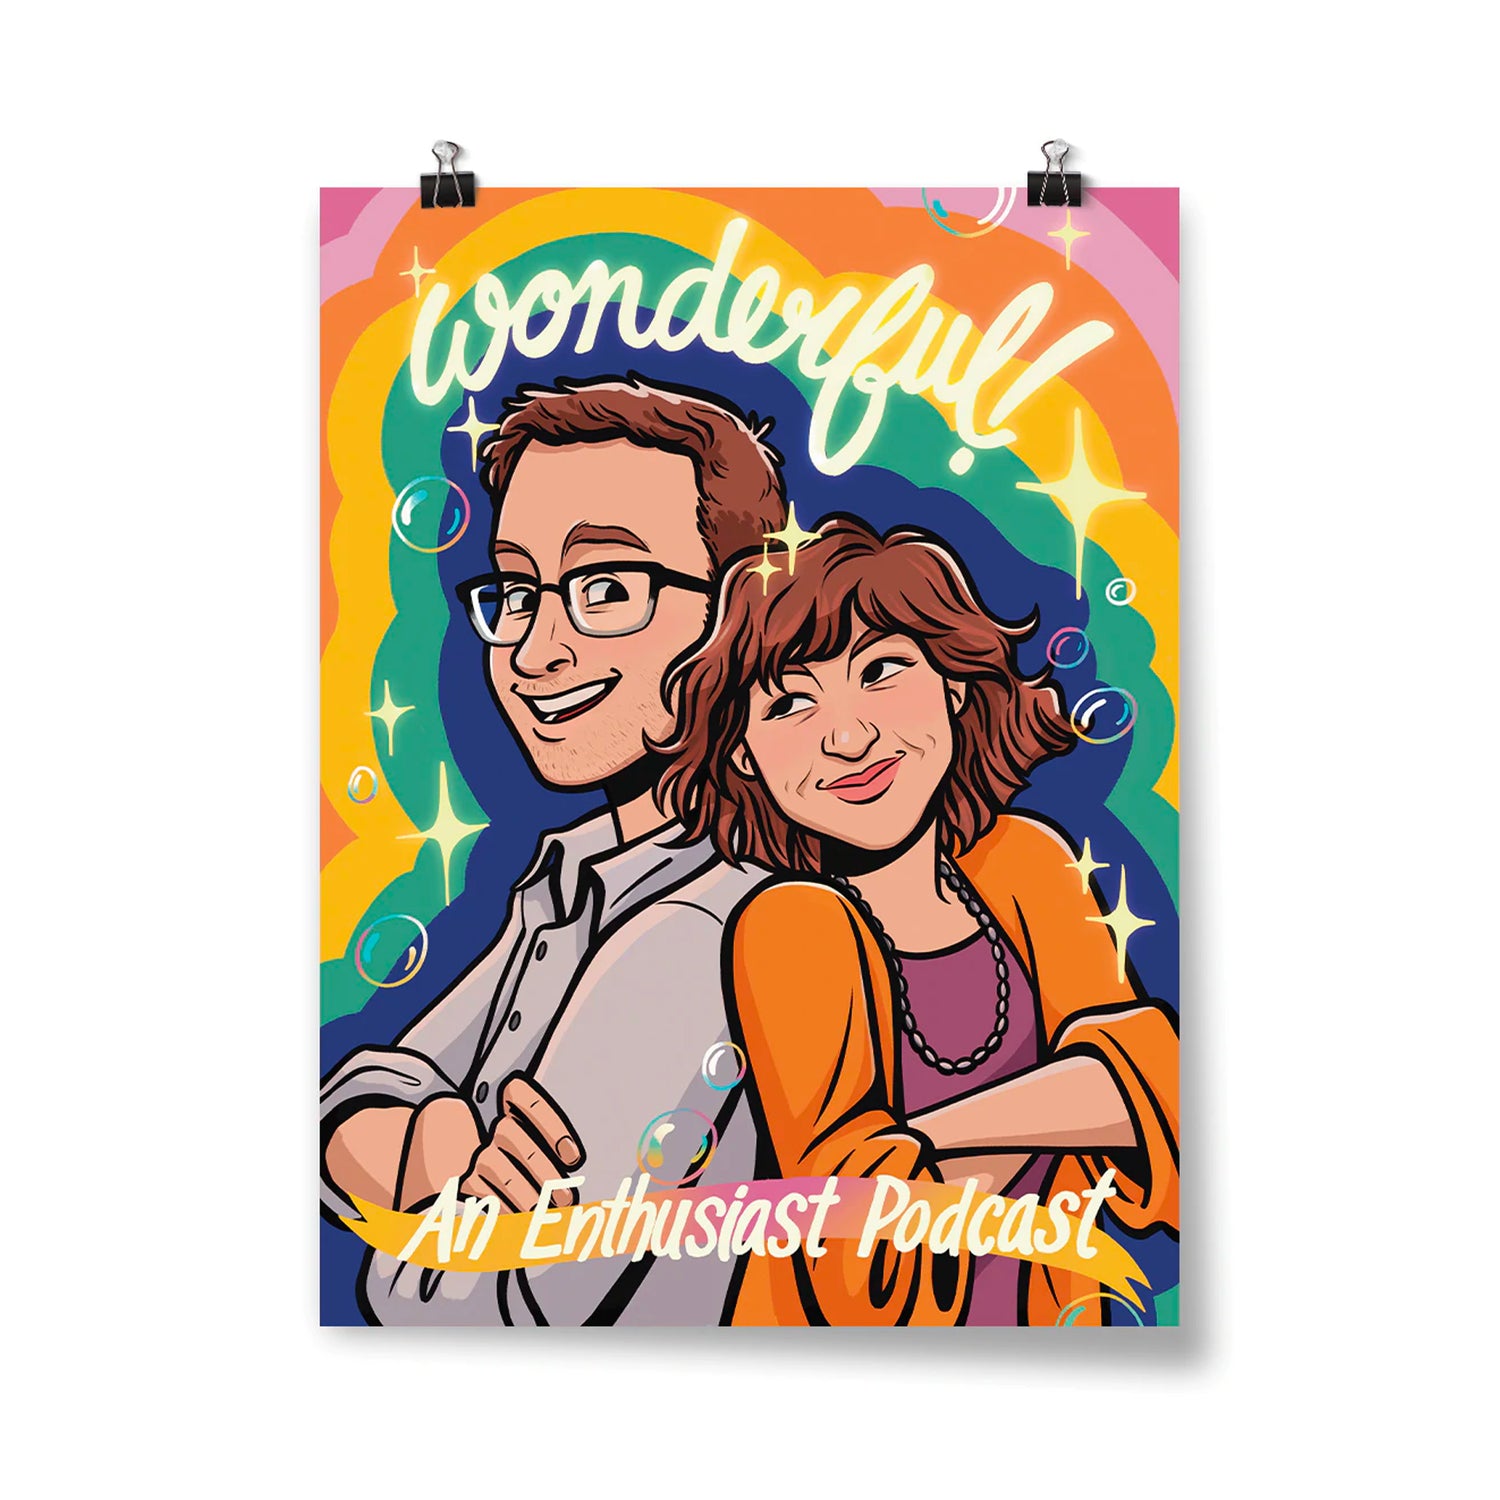 An illustration of Griffin and Rachel standing back to back. The background is retro rainbow contours with bubbles and sparkles. Above them it says, "Wonderful!" and below it says "An Enthusiast Podcast" in a yellow and pink gradient banner.